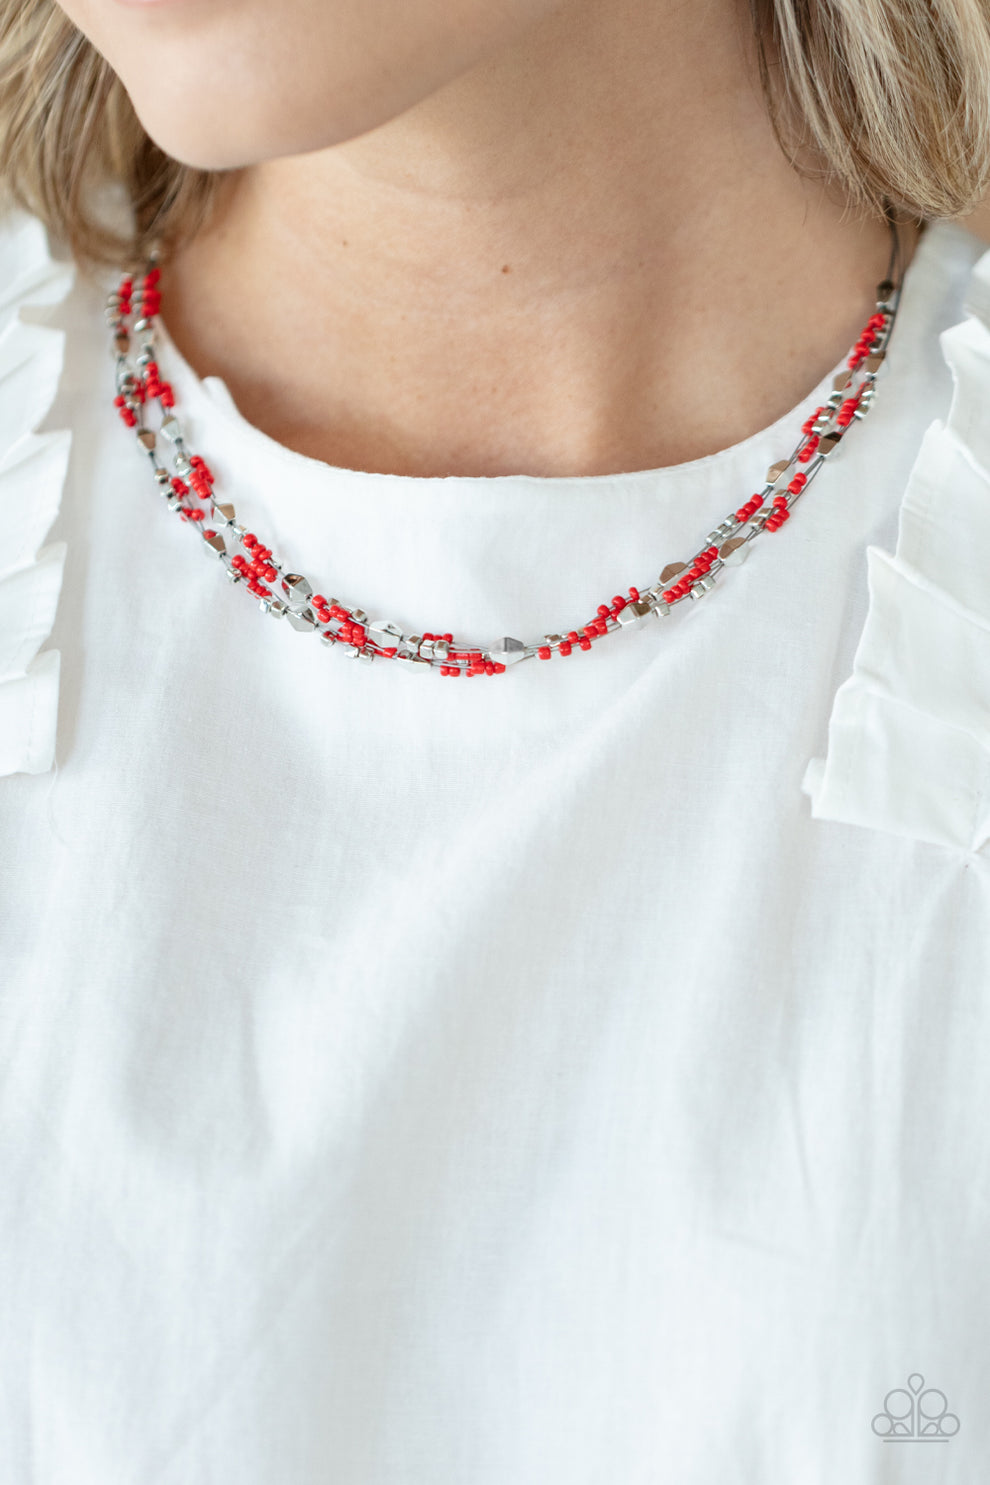 Explore Every Angle Red
Necklace Paparazzi